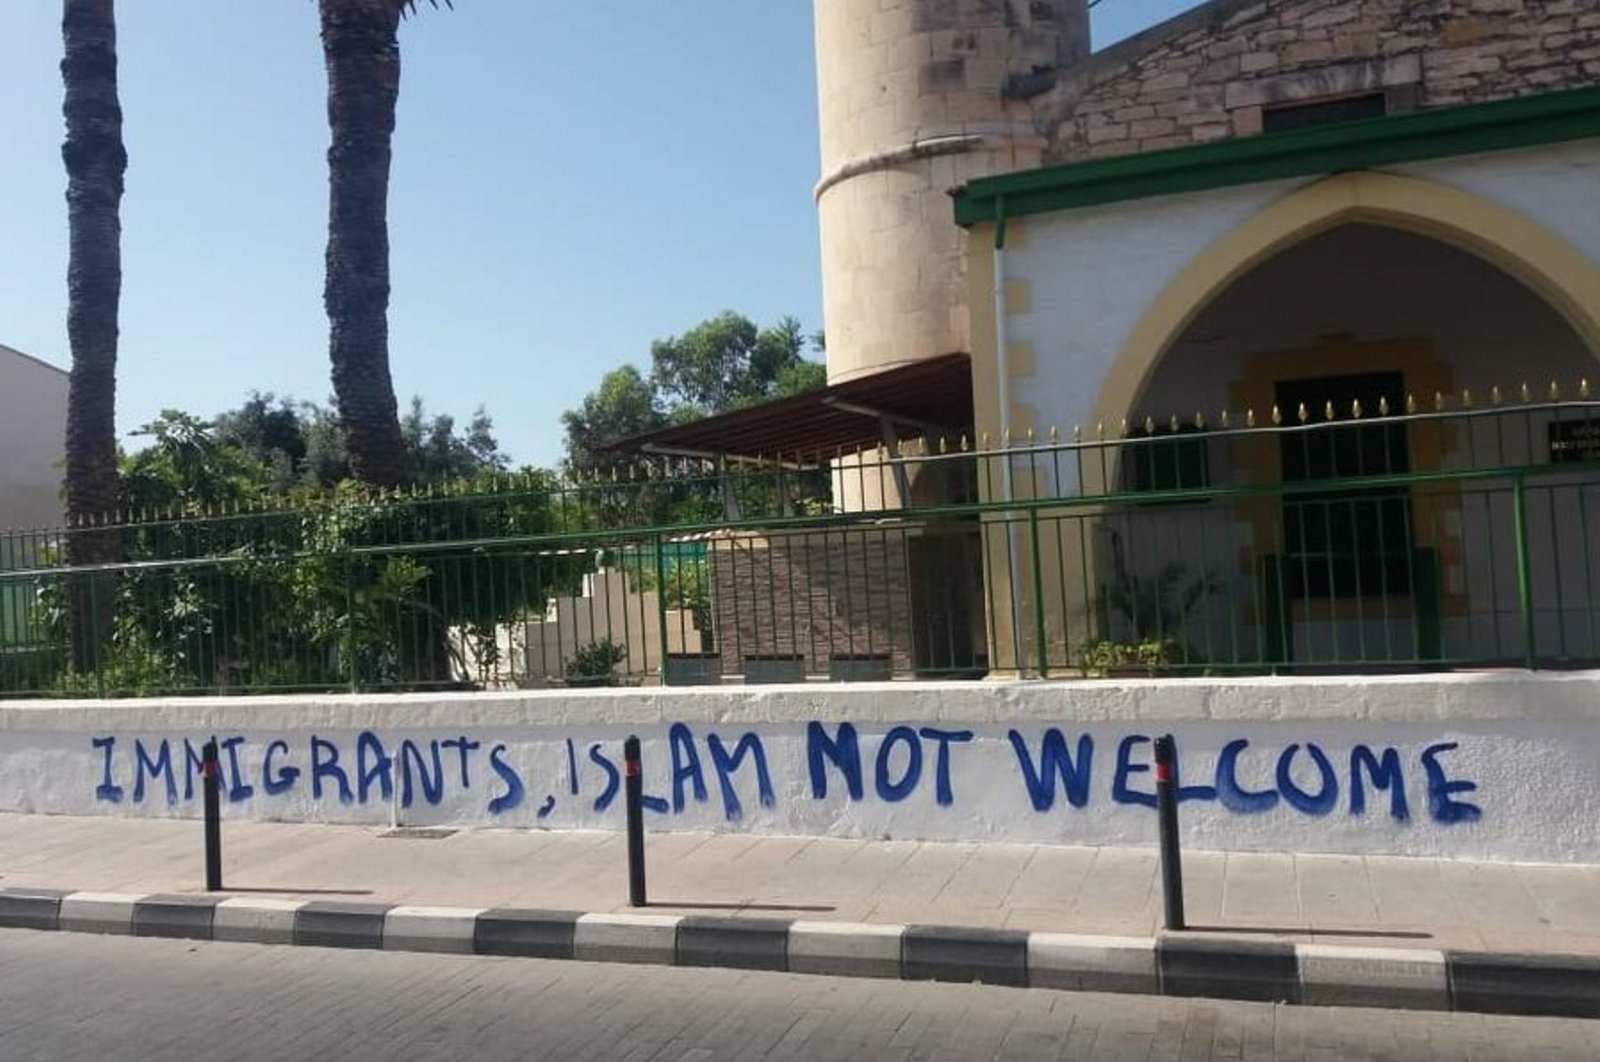 The garden wall of the Köprülü Hacı Ibrahim Ağa Mosque reads "Immigrants, Islam not welcome" in spray paint after a perpetrator attacked the mosque, in Limassol, Greek Cyprus, Aug. 26, 2023. (AA Photo)